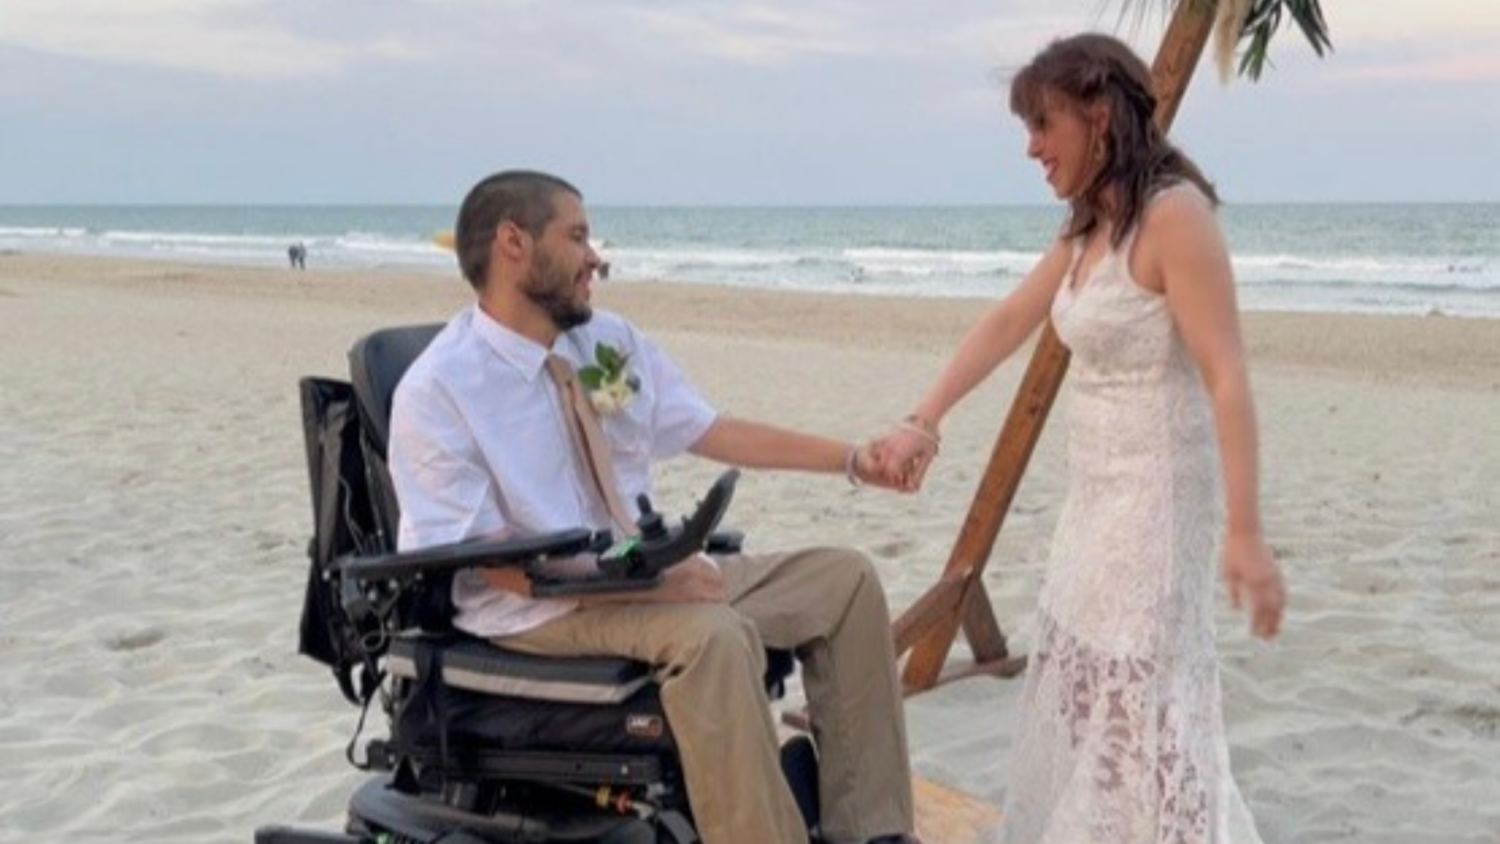 Hunter and Emily Knisley wed on beach